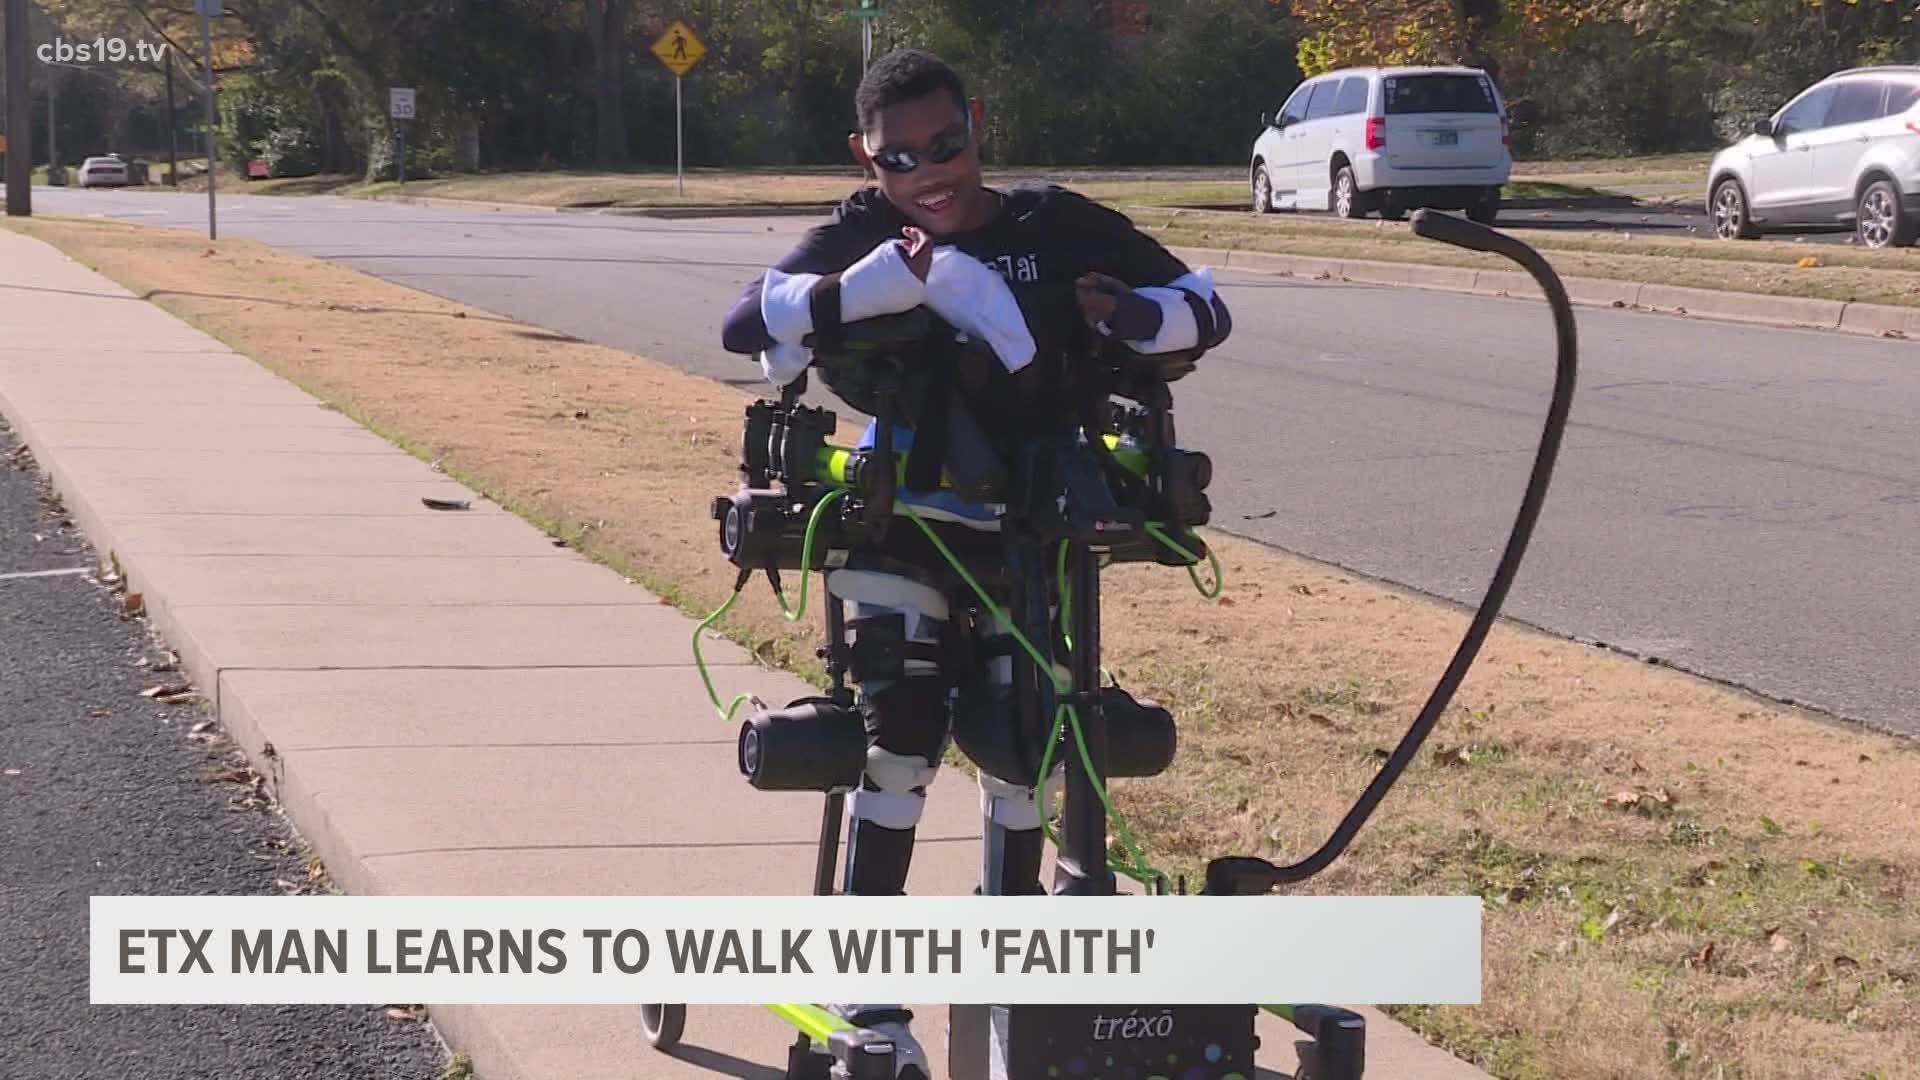 23-year-old DeJai Mitchell was born with cerebral palsy.